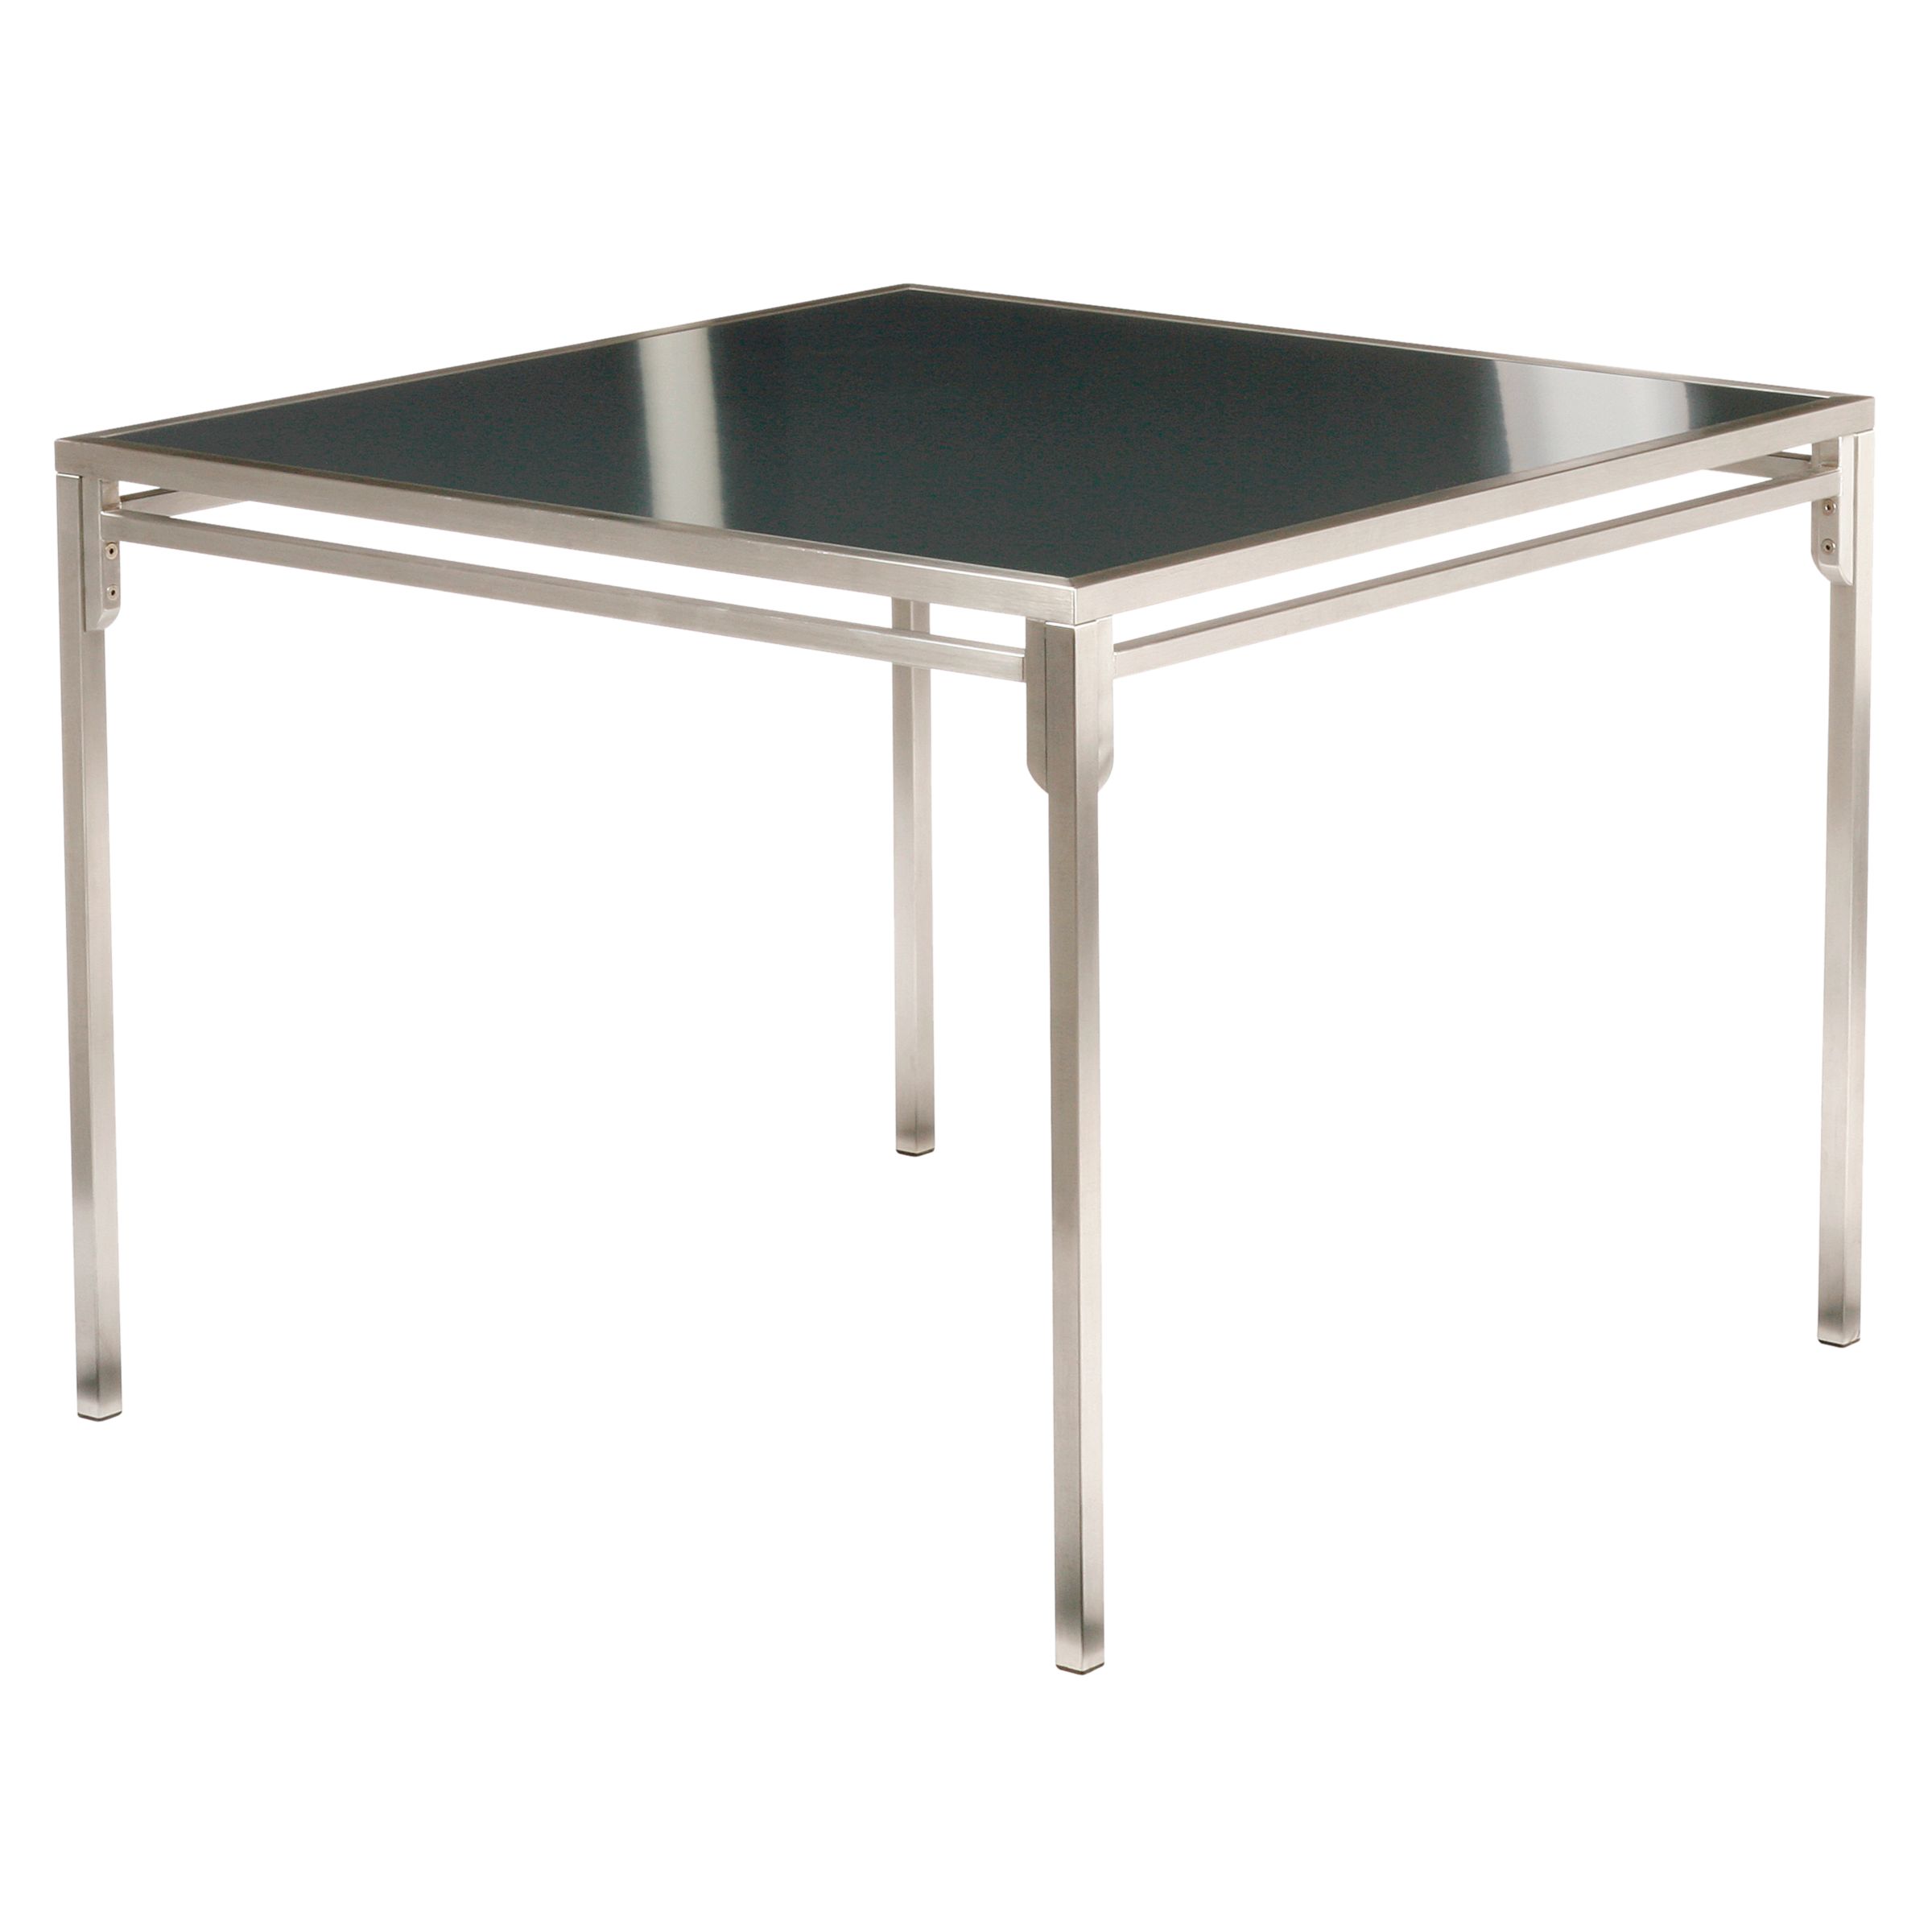 Barlow Tyrie Quattro Dining Table, L95cm